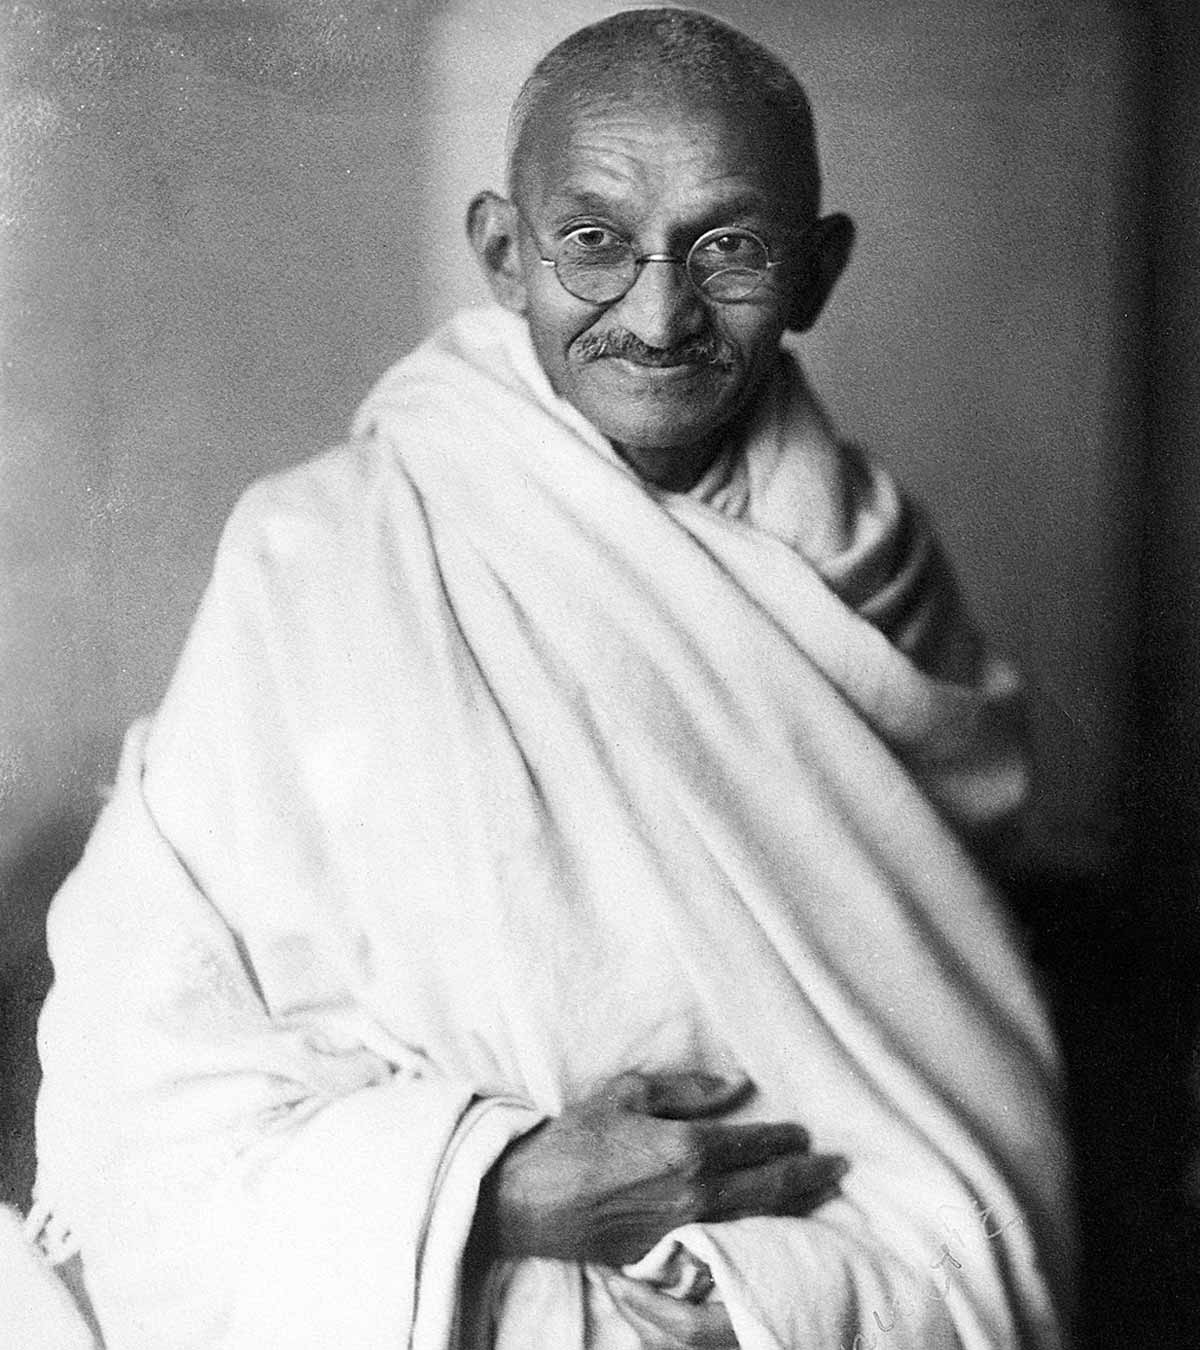 20 Interesting Facts About Mahatma Gandhi For Kids